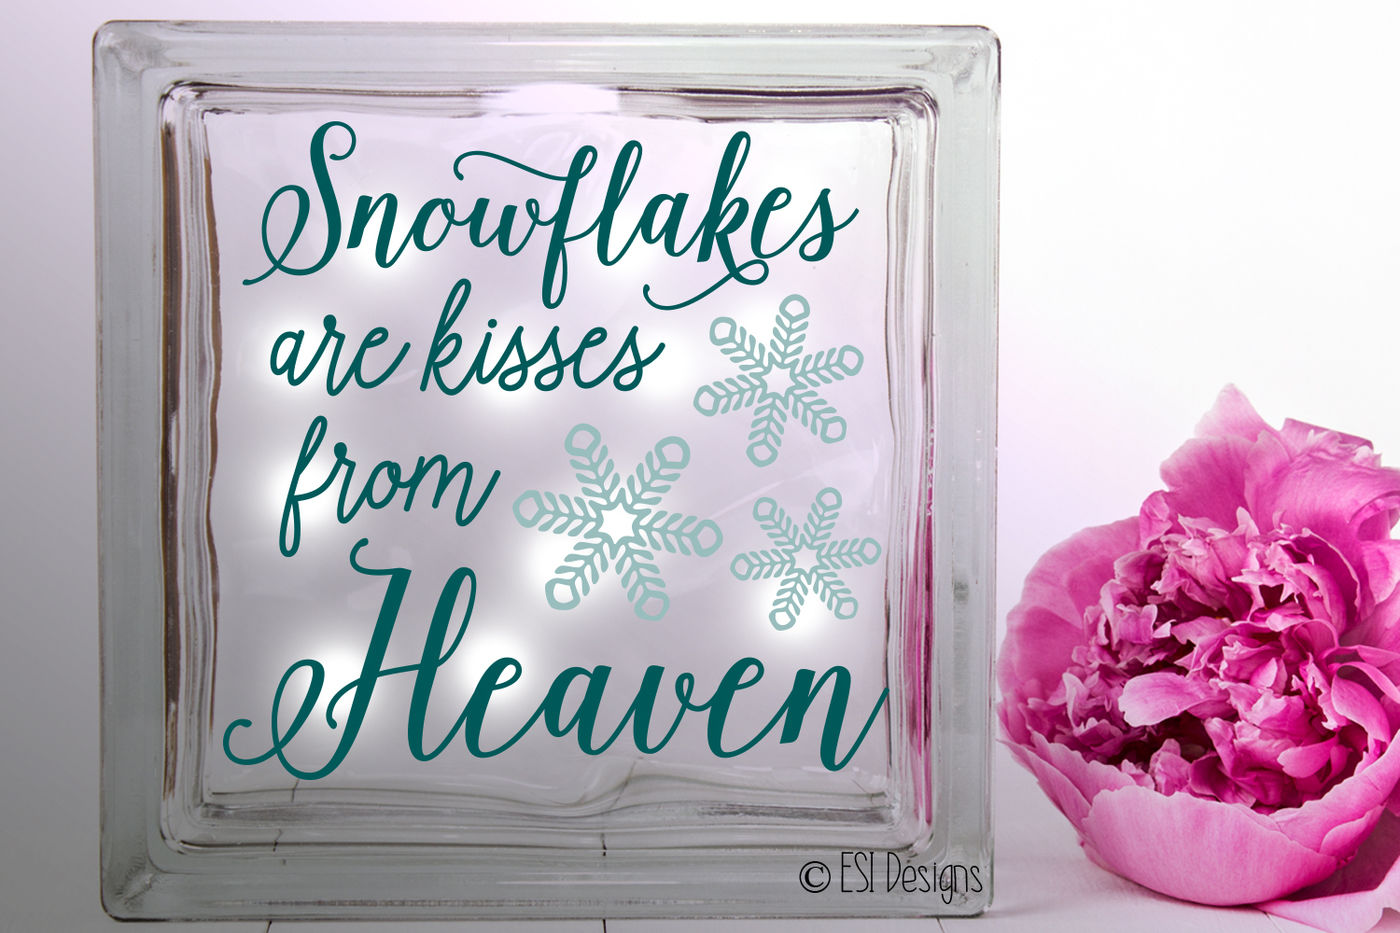 Snowflakes Are Kisses From Heaven Christmas Quote Design By Esi Designs Thehungryjpeg Com